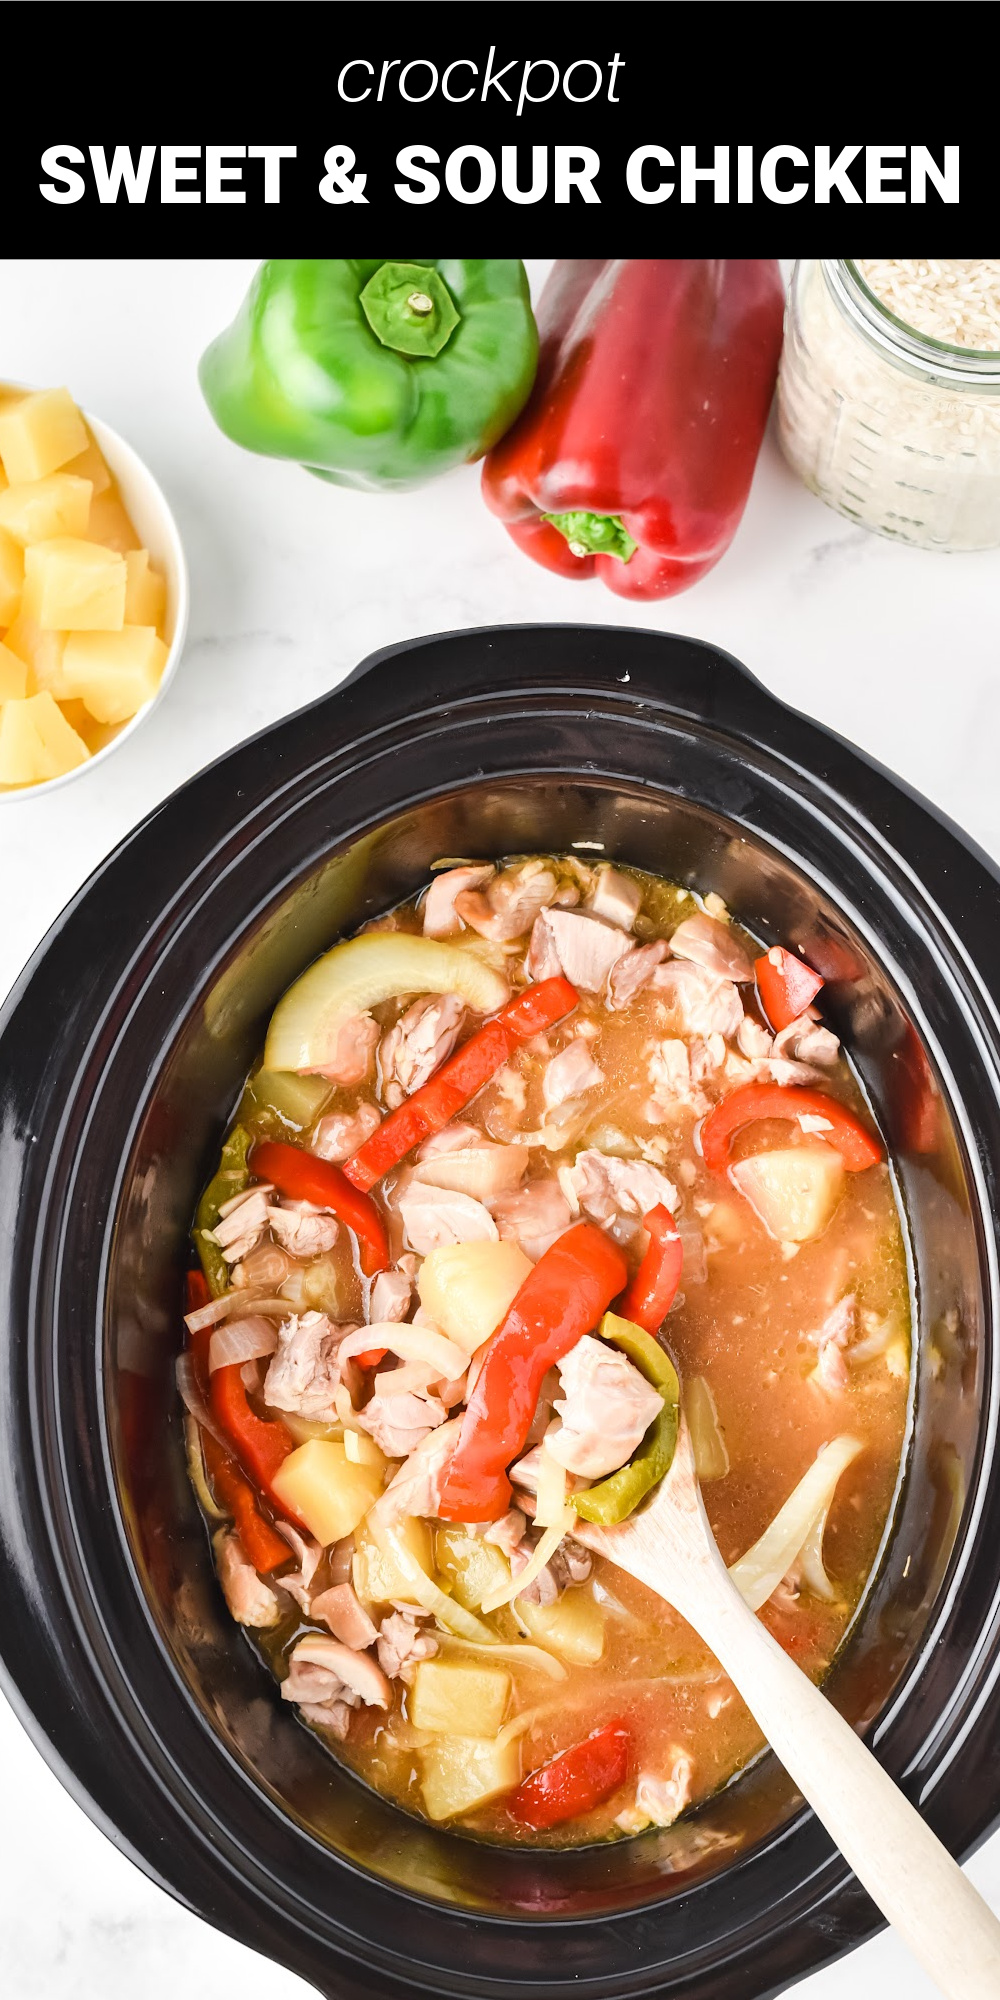 This delicious Crockpot Sweet and Sour Chicken recipe is one of the easiest Chinese recipes you’ll ever make. You just mix up the homemade sweet and sour sauce, put everything in the crockpot then set it and forget it!